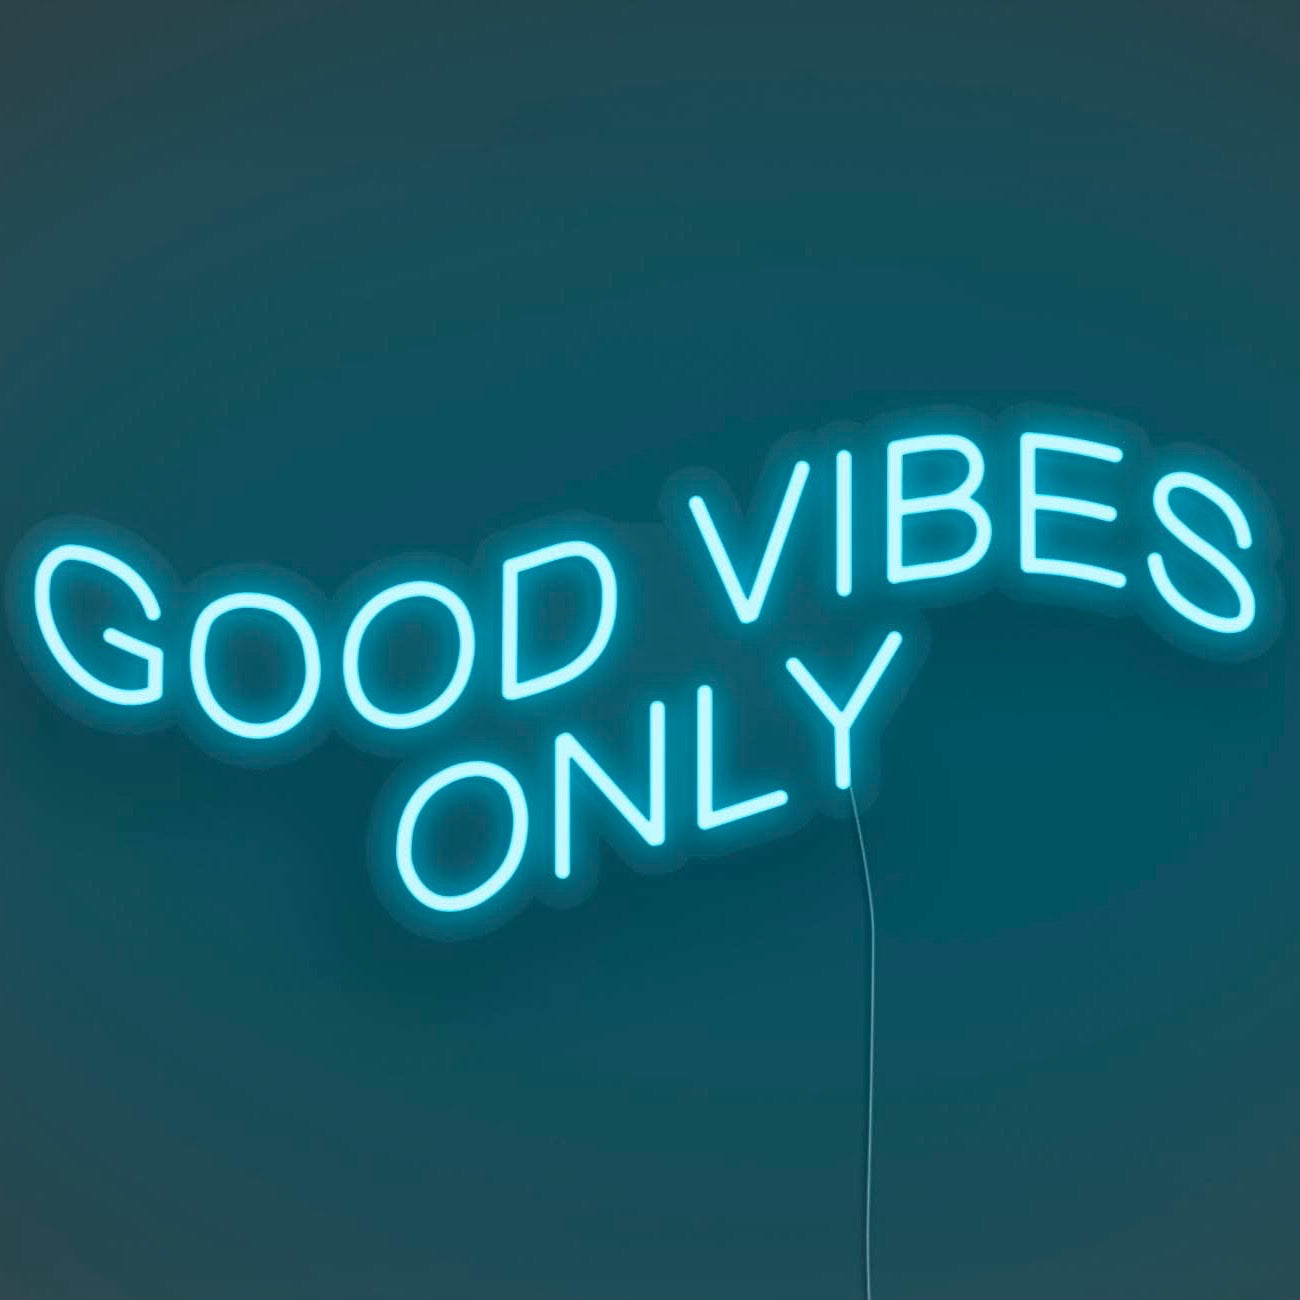 Good Vibes Only LED Neon Sign - Neon Mfg.